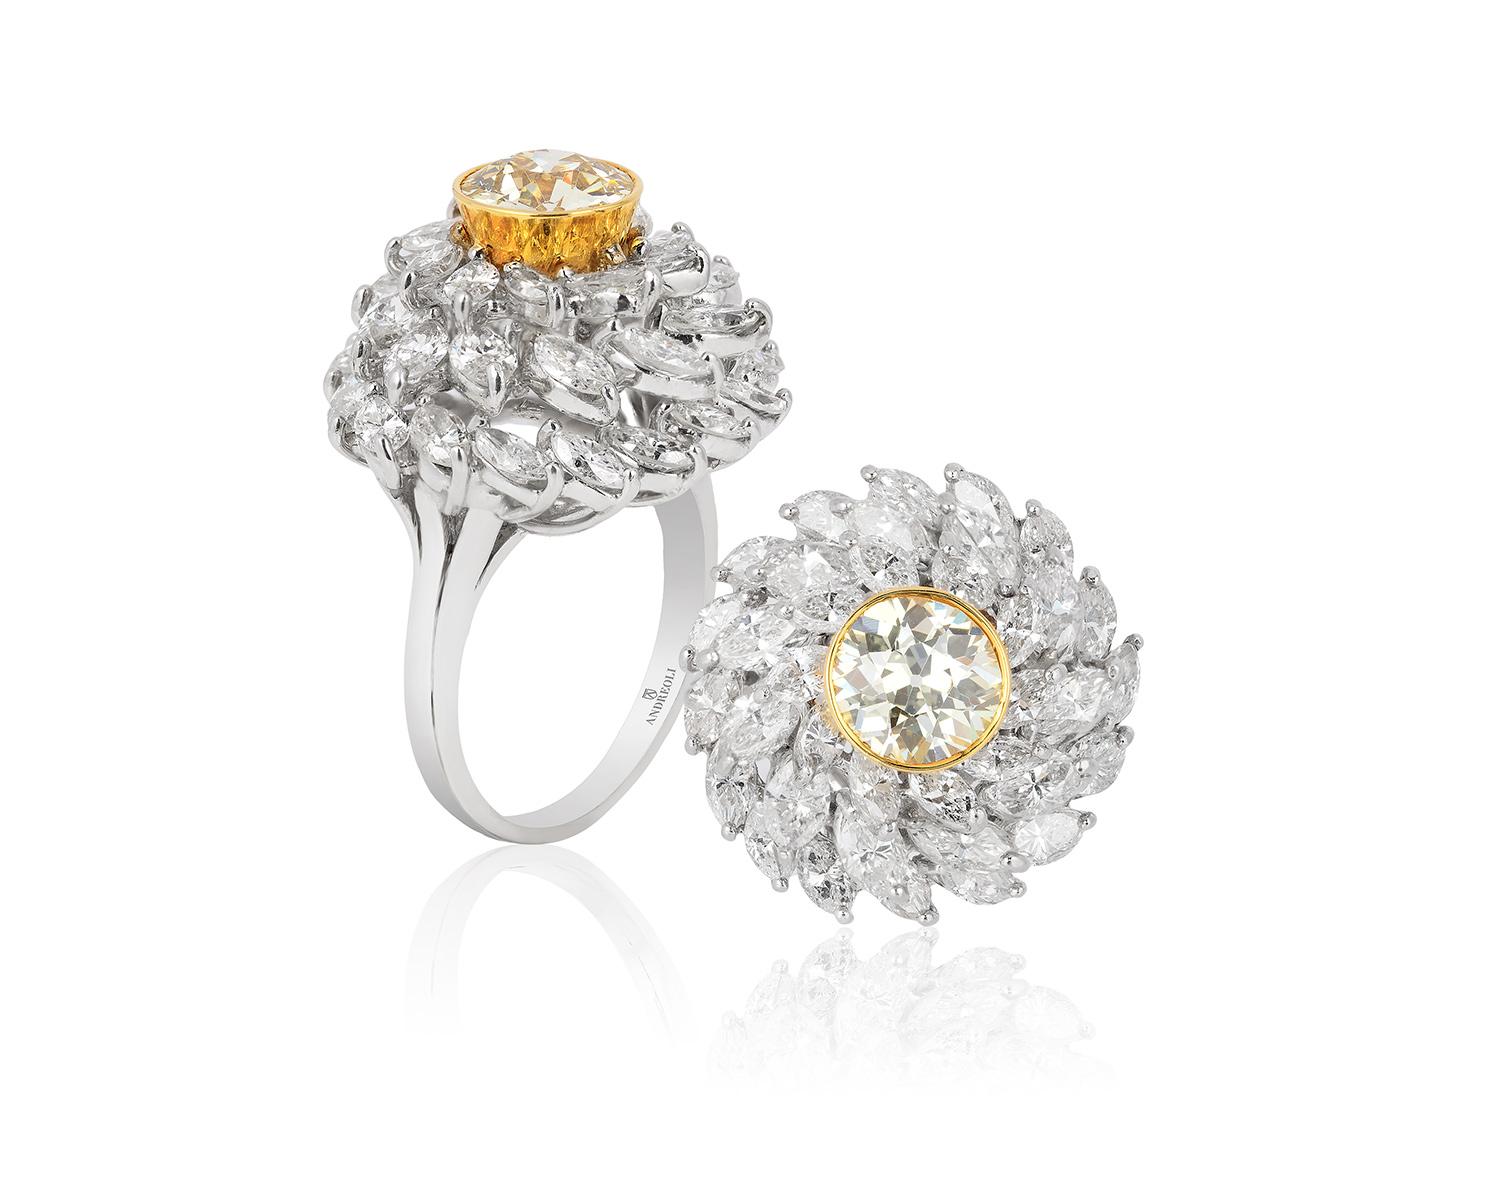 Contemporary Andreoli 7.29 Carat Diamond Flower Cocktail Ring 18 Karat Gold For Sale